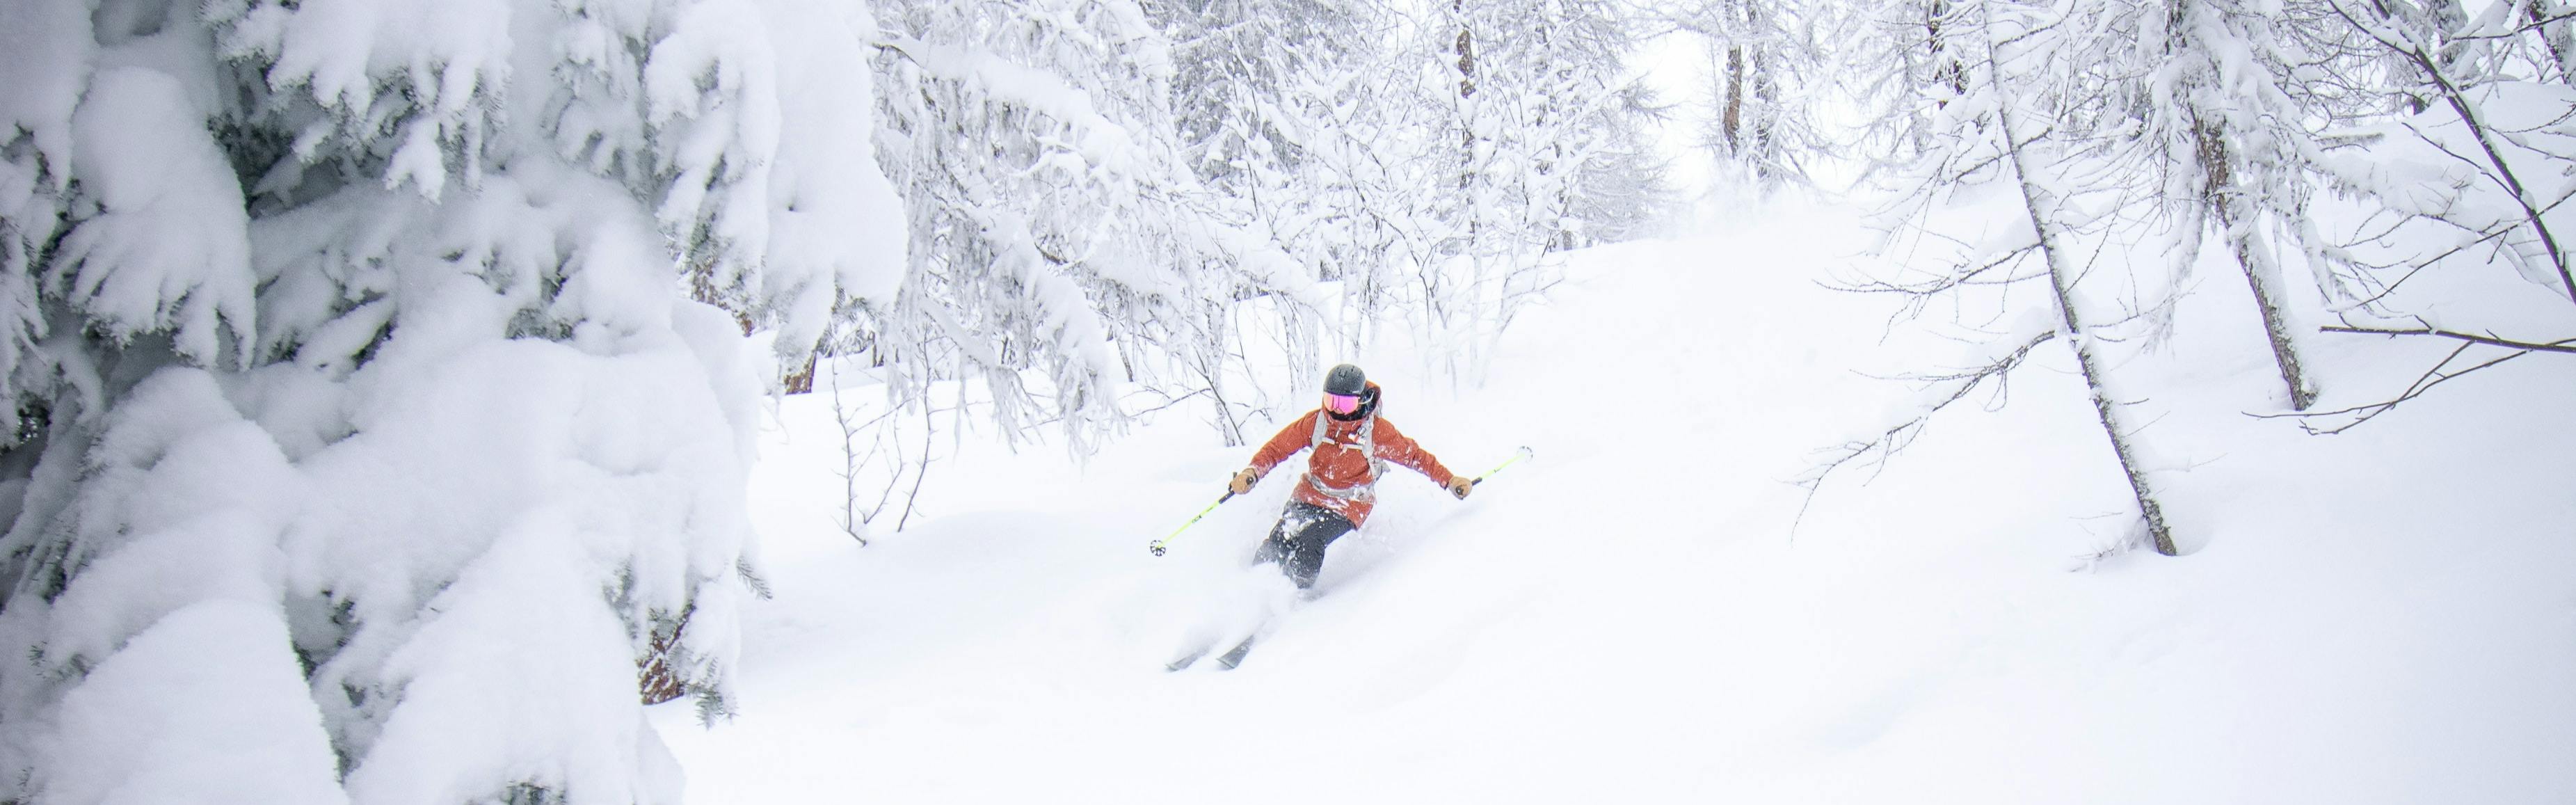 A skier in an orange jacket going down a powder run in a blizzard surrounded by snow covered trees